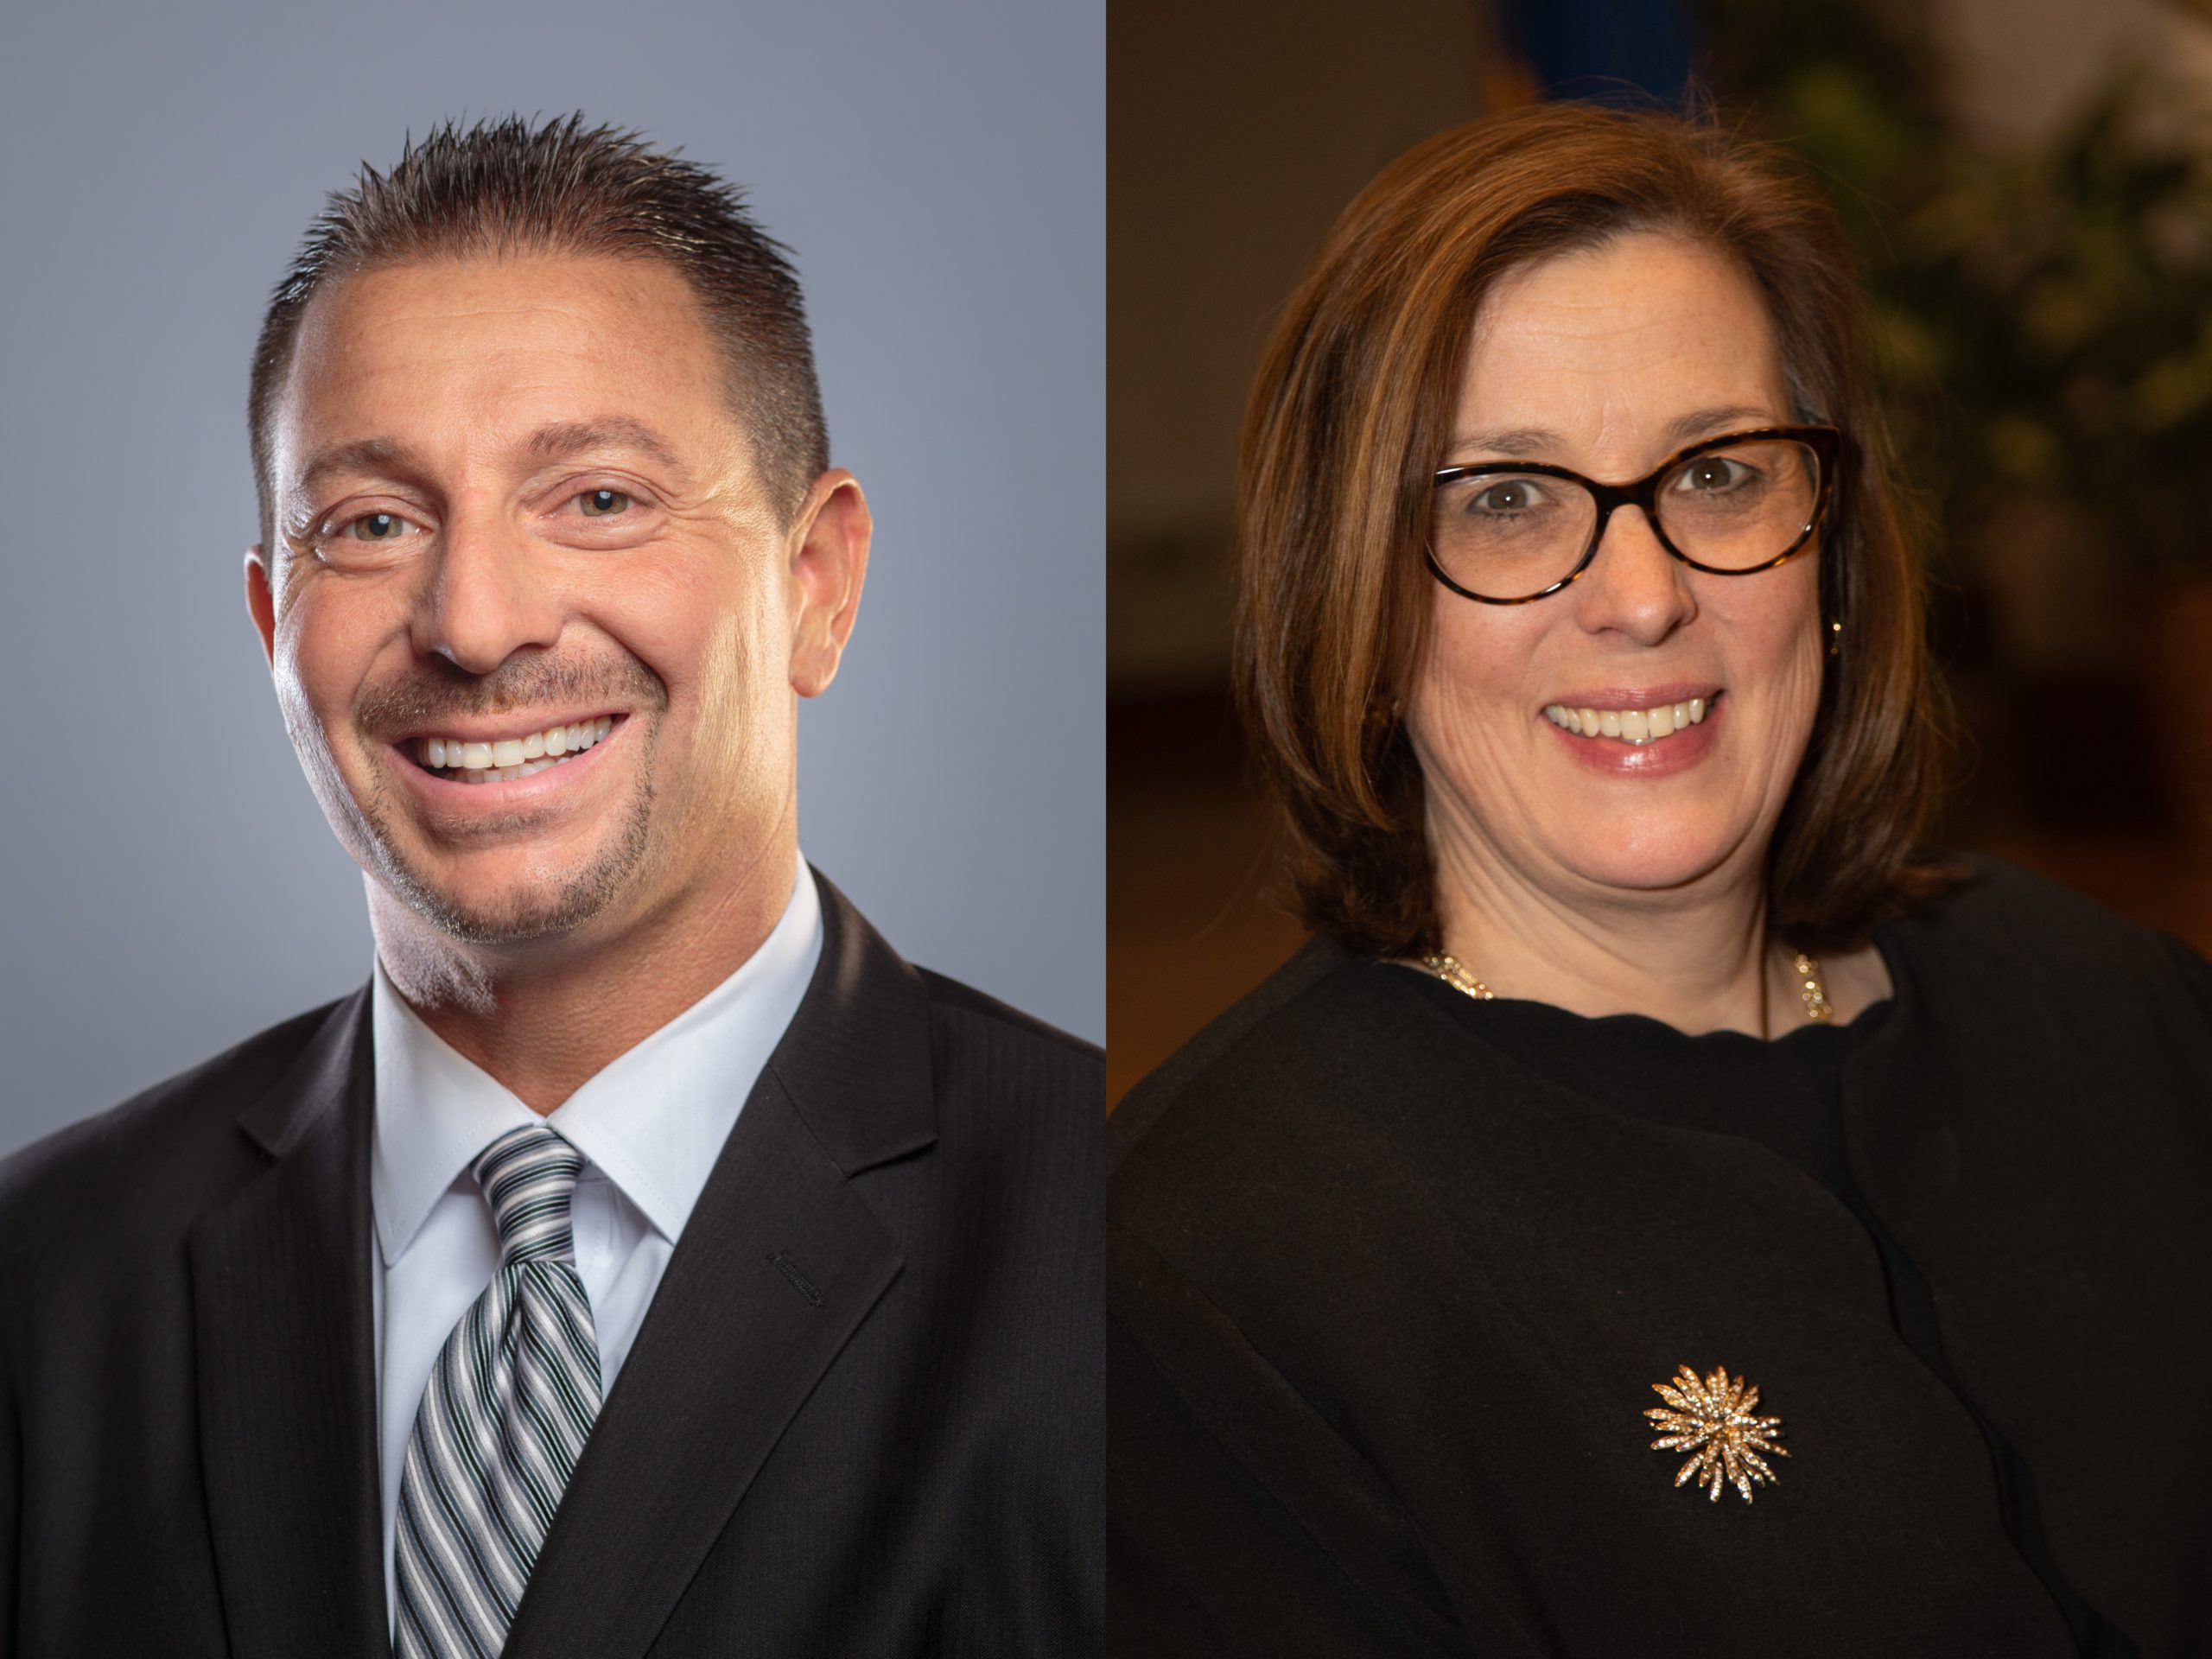 Mark D. Benigni is superintendent of Meriden Public Schools in Connecticut. Susan O. Moore is the district's supervisor of blended learning.